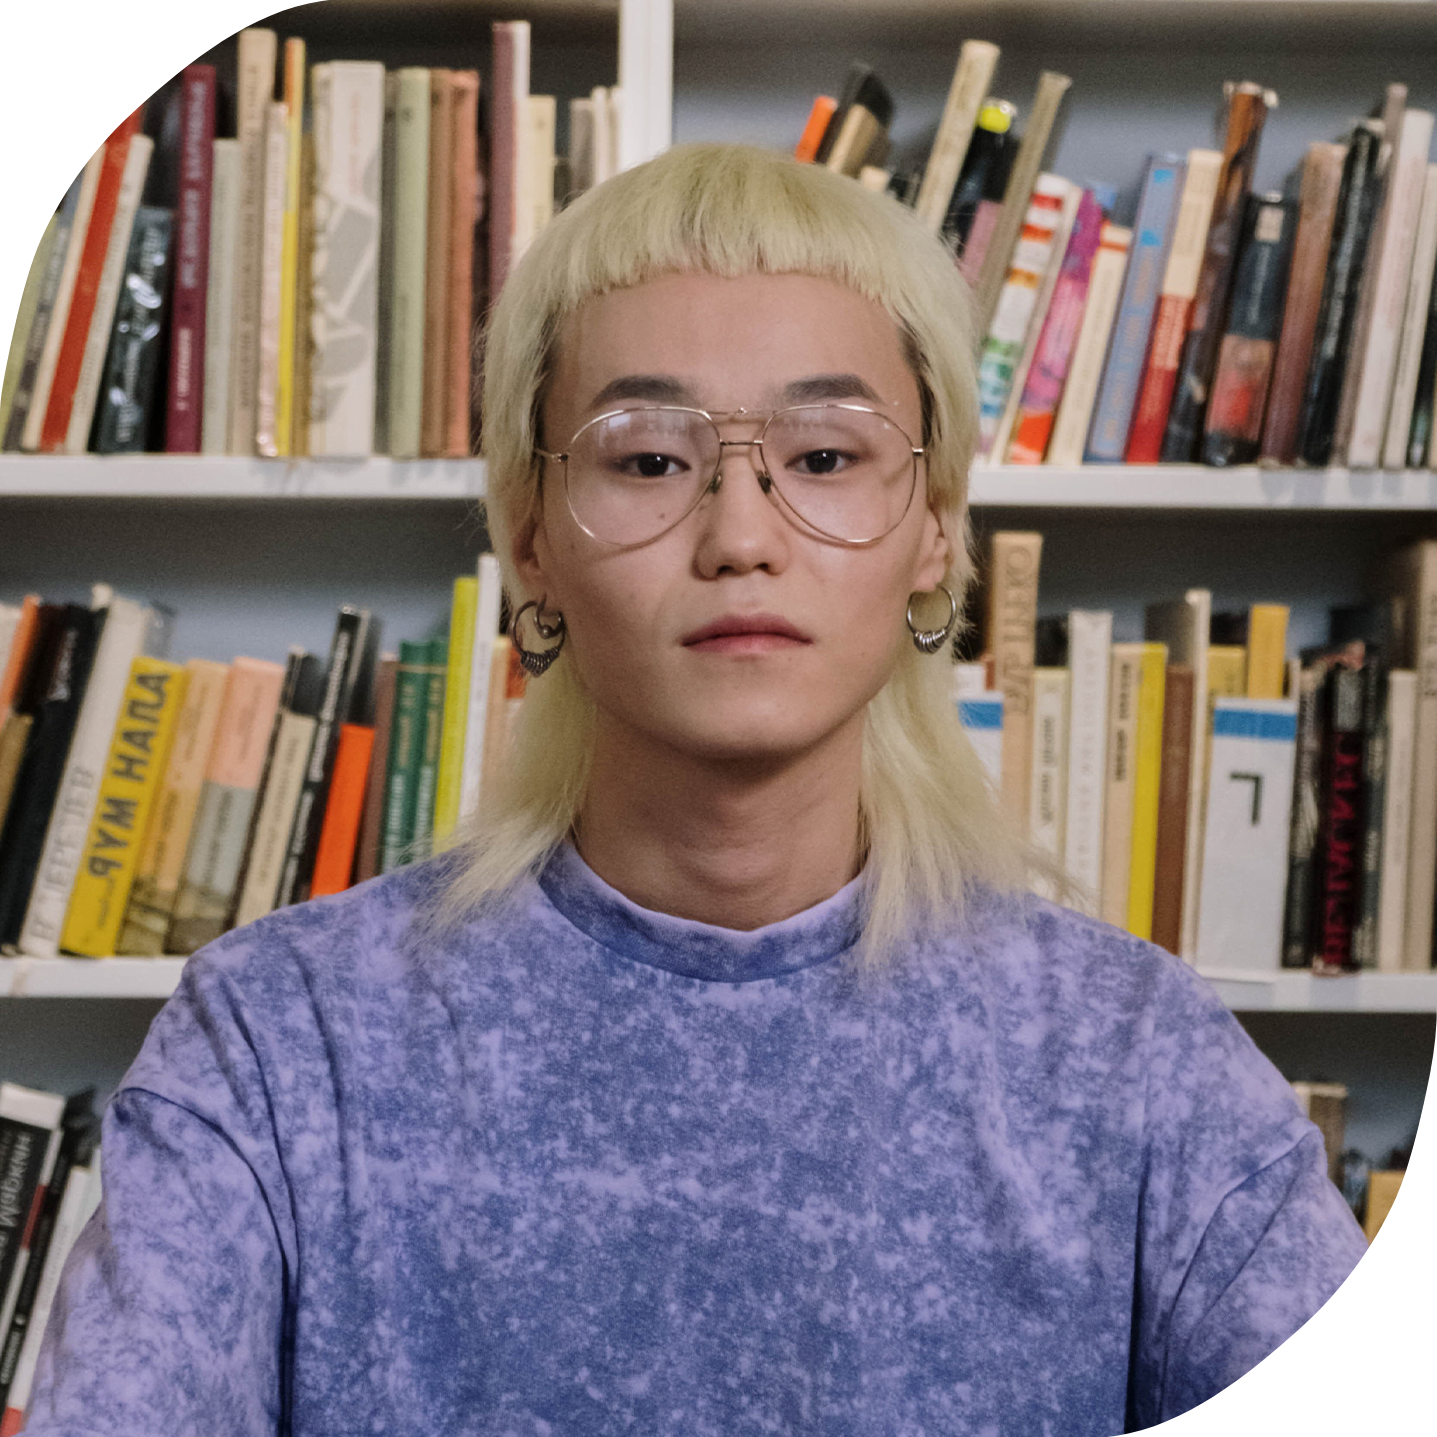 A portrait of a trans Asian person with blonde hair in a library